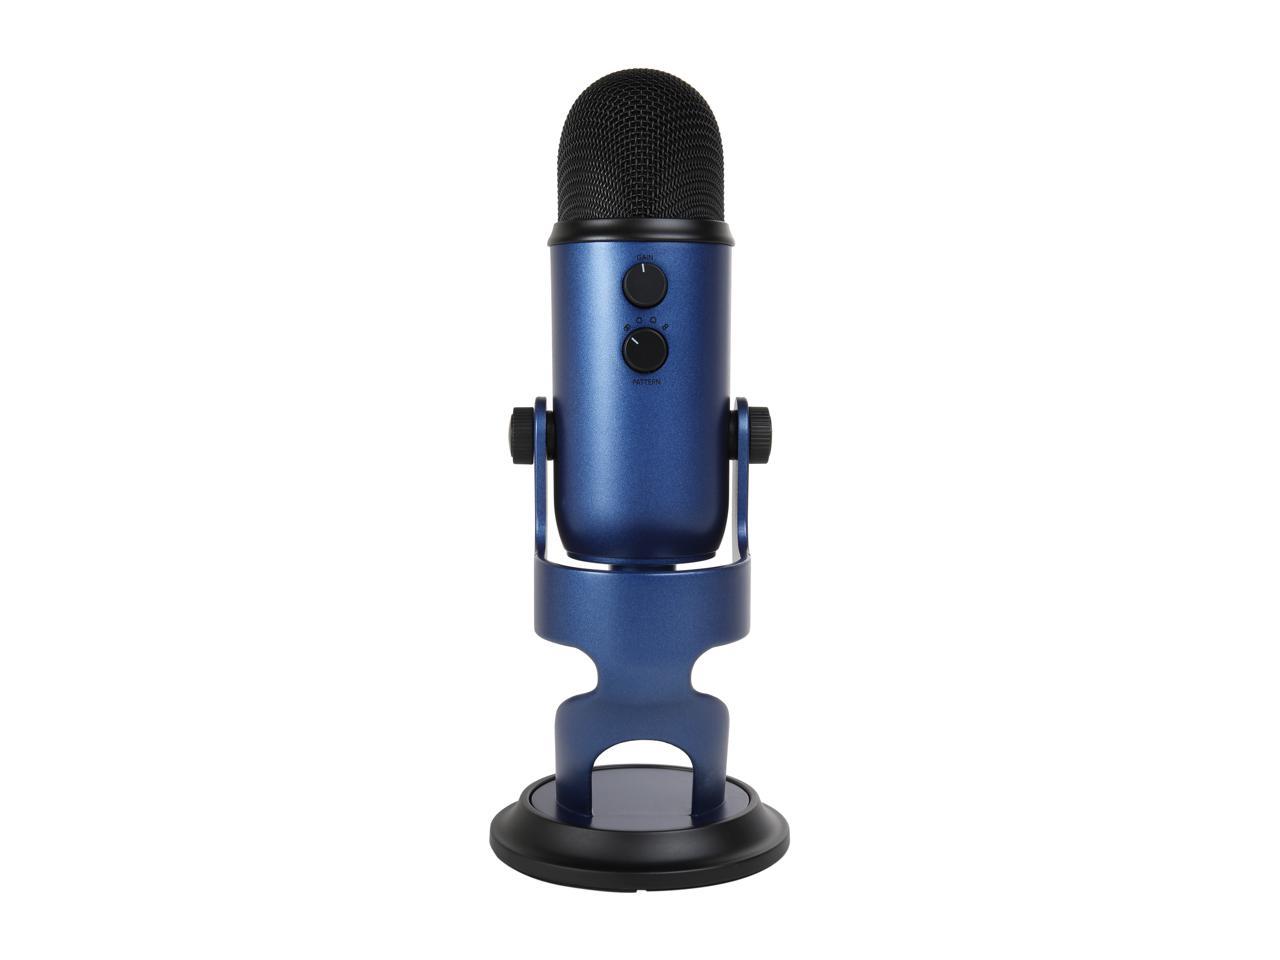 Blue Yeti USB Microphone for PC, Mac, Gaming, Recording, Streaming, Podcasting, Studio and Computer Condenser Mic with Blue VO!CE effects, 4 Pickup Patterns, Plug and Play – Midnight Blue - image 4 of 7